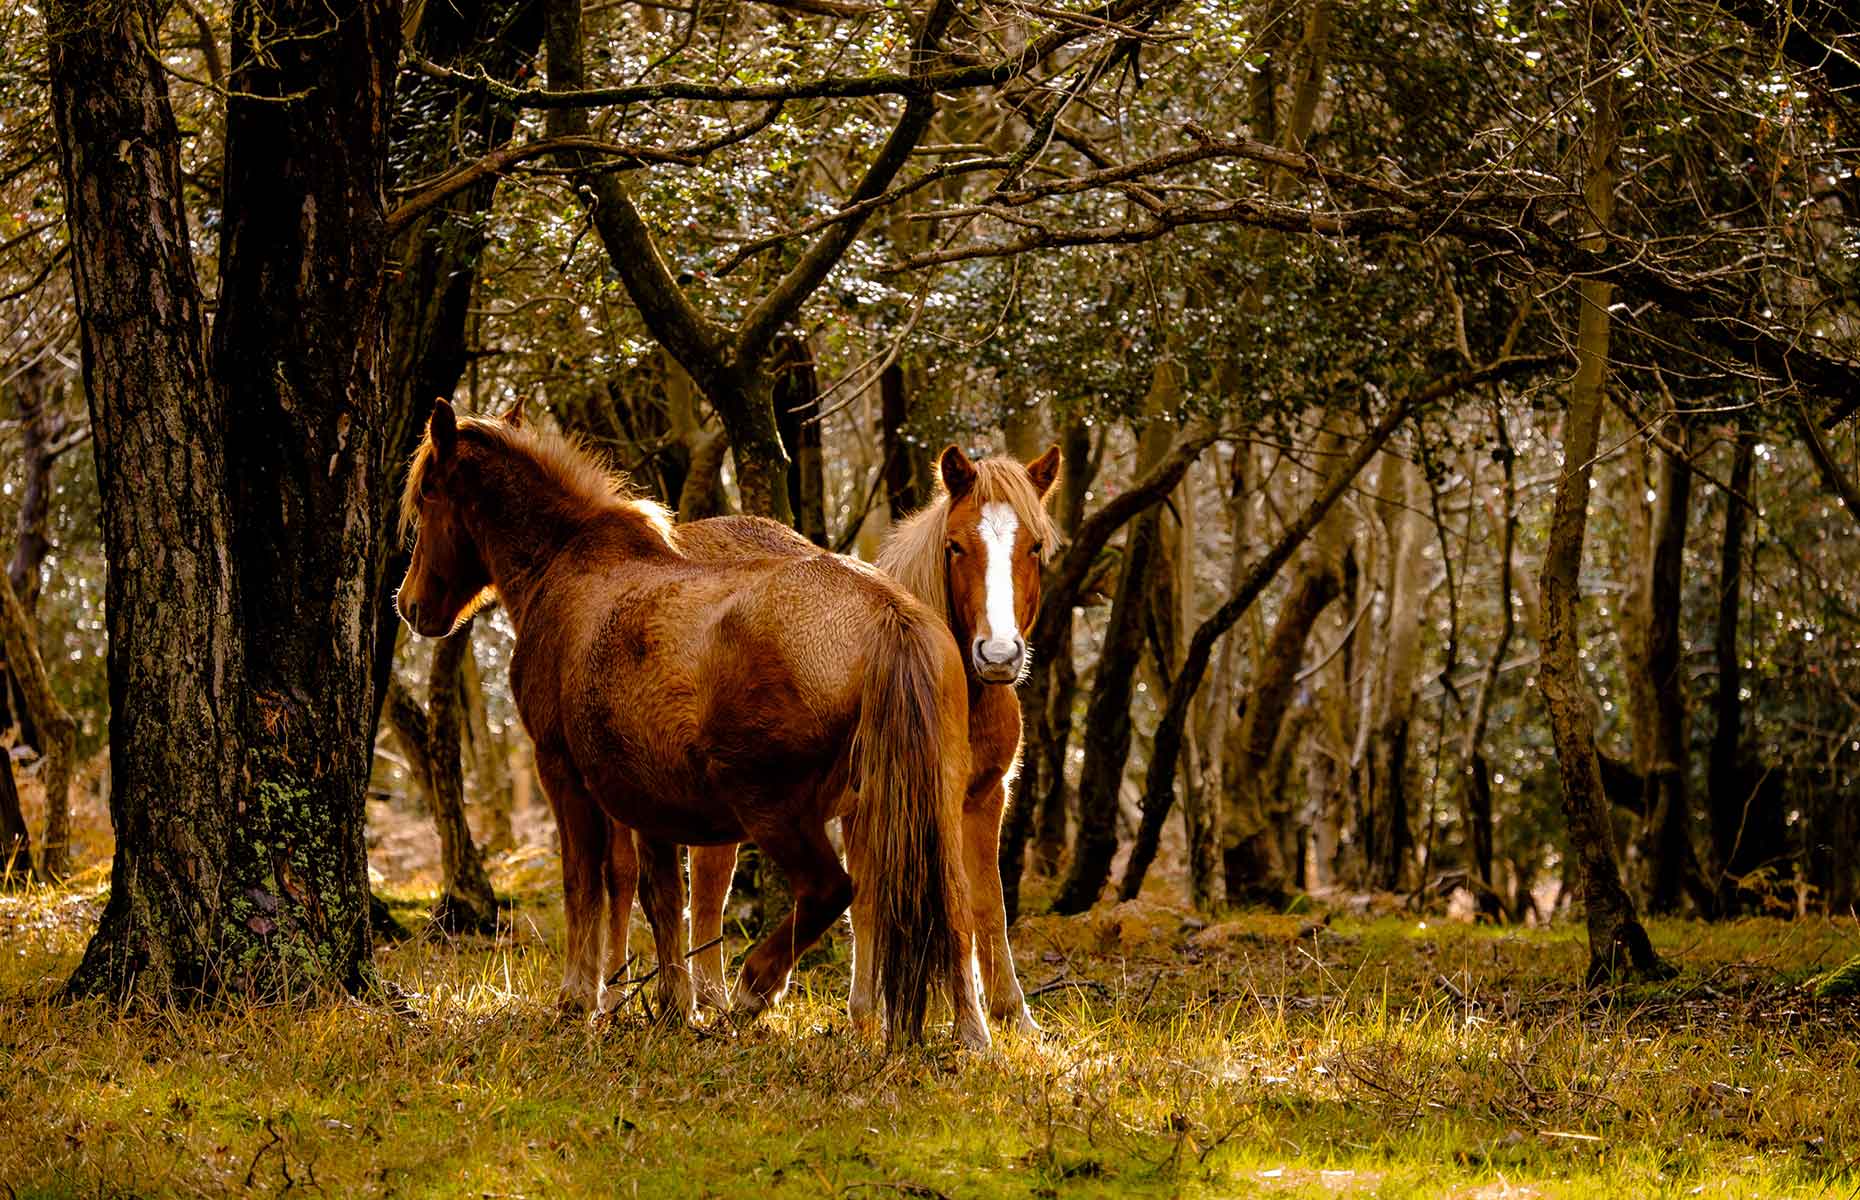 New Forest National Park ponies (Image: ImagesbyInfinity/Shutterstock)